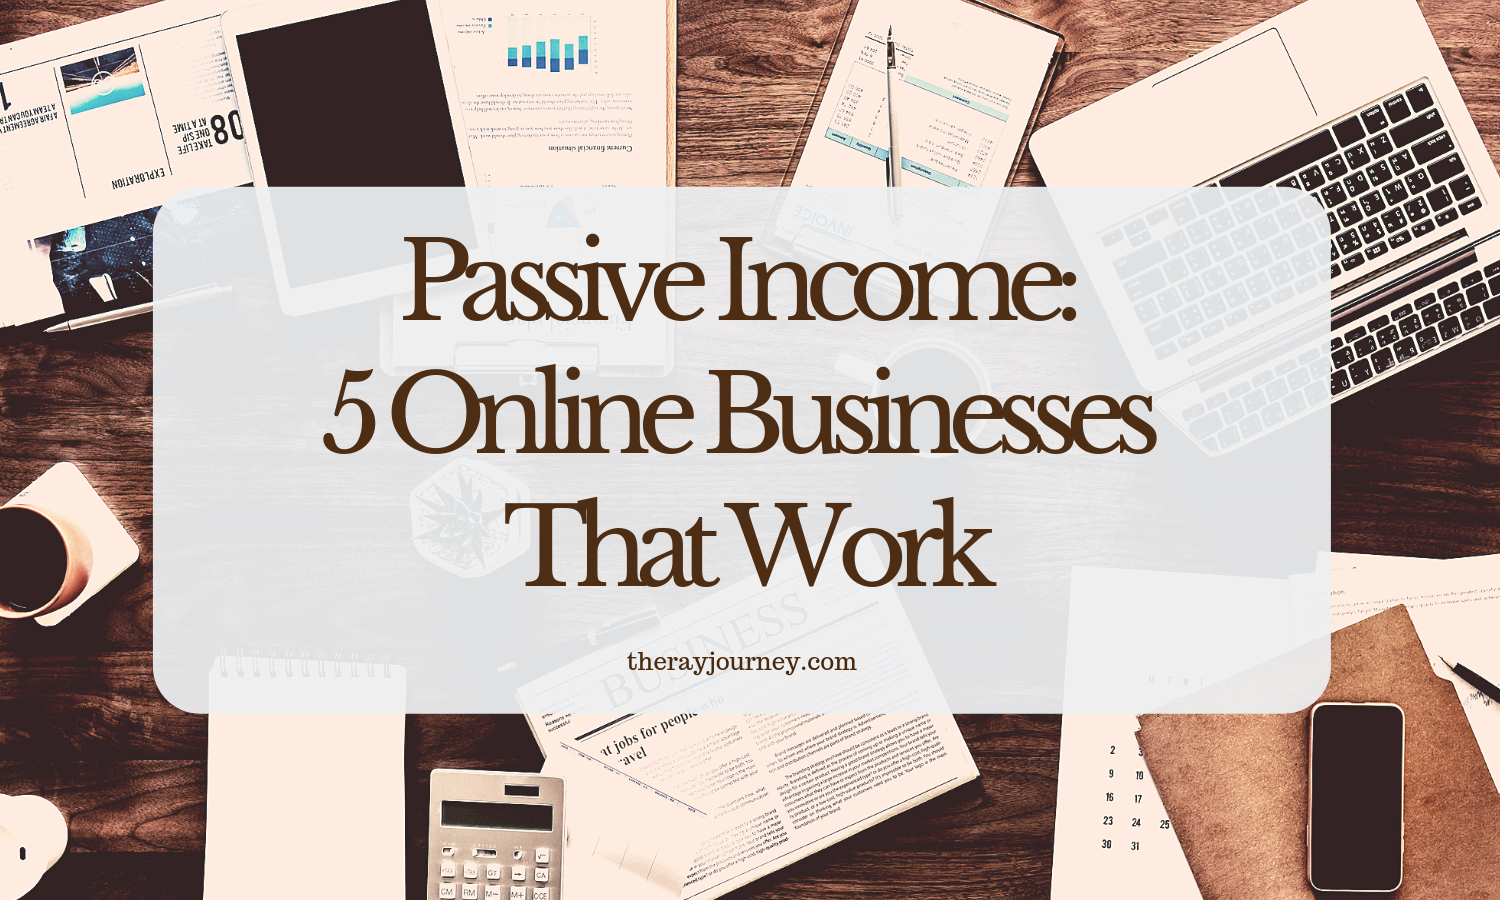 Passive Income: 5 Online Businesses That Work